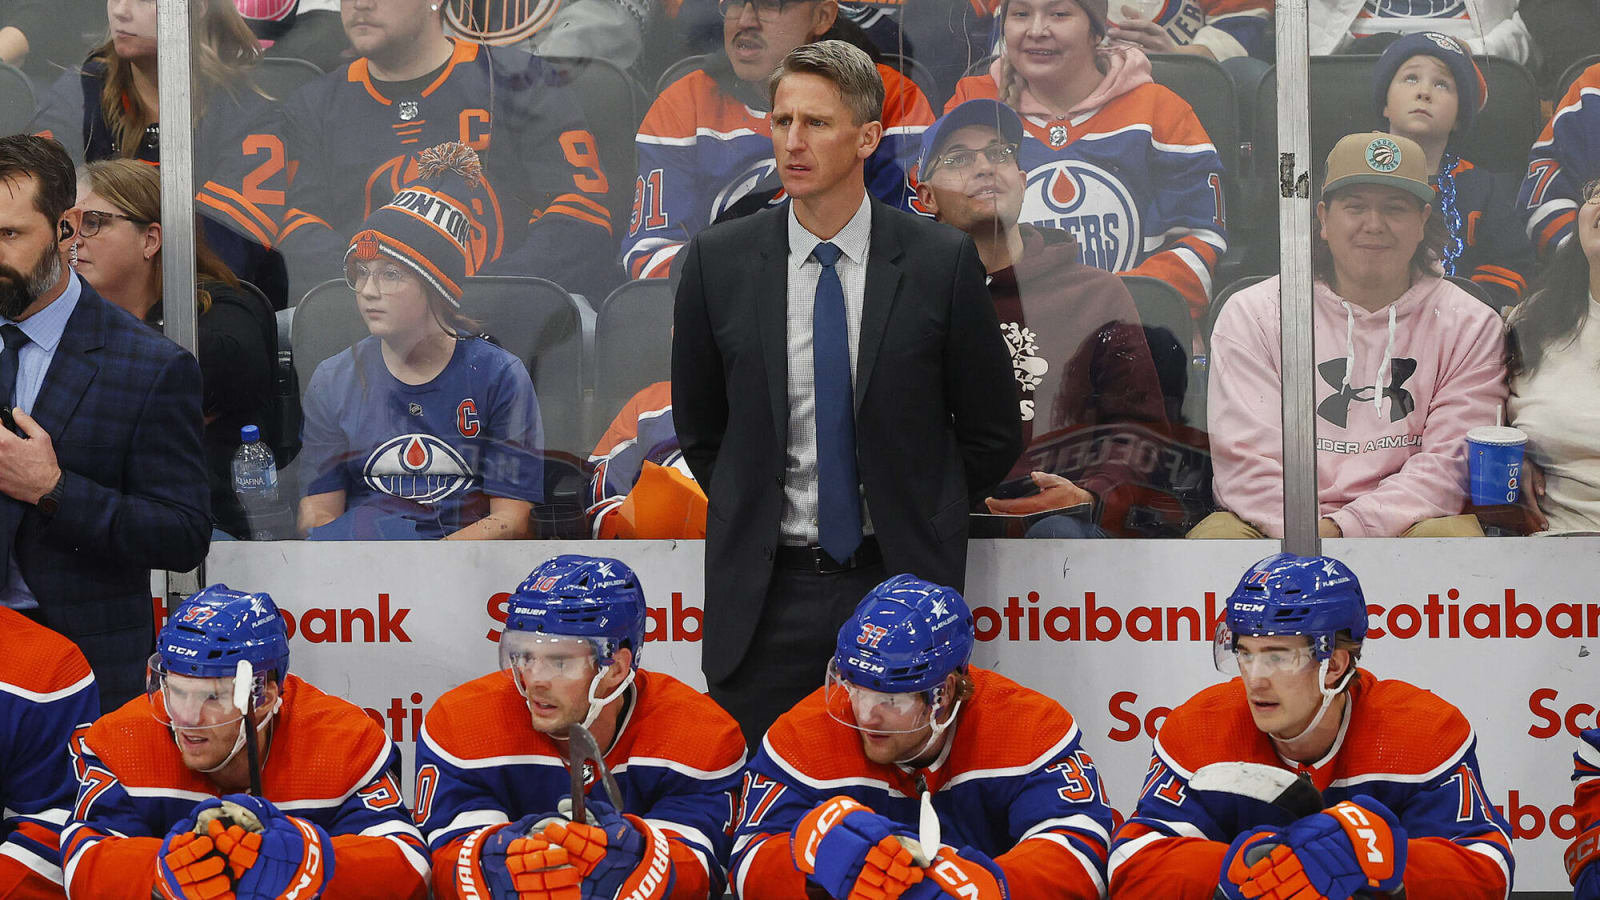 Home Ice Advantage and the Oilers’ Optimal Line Combinations